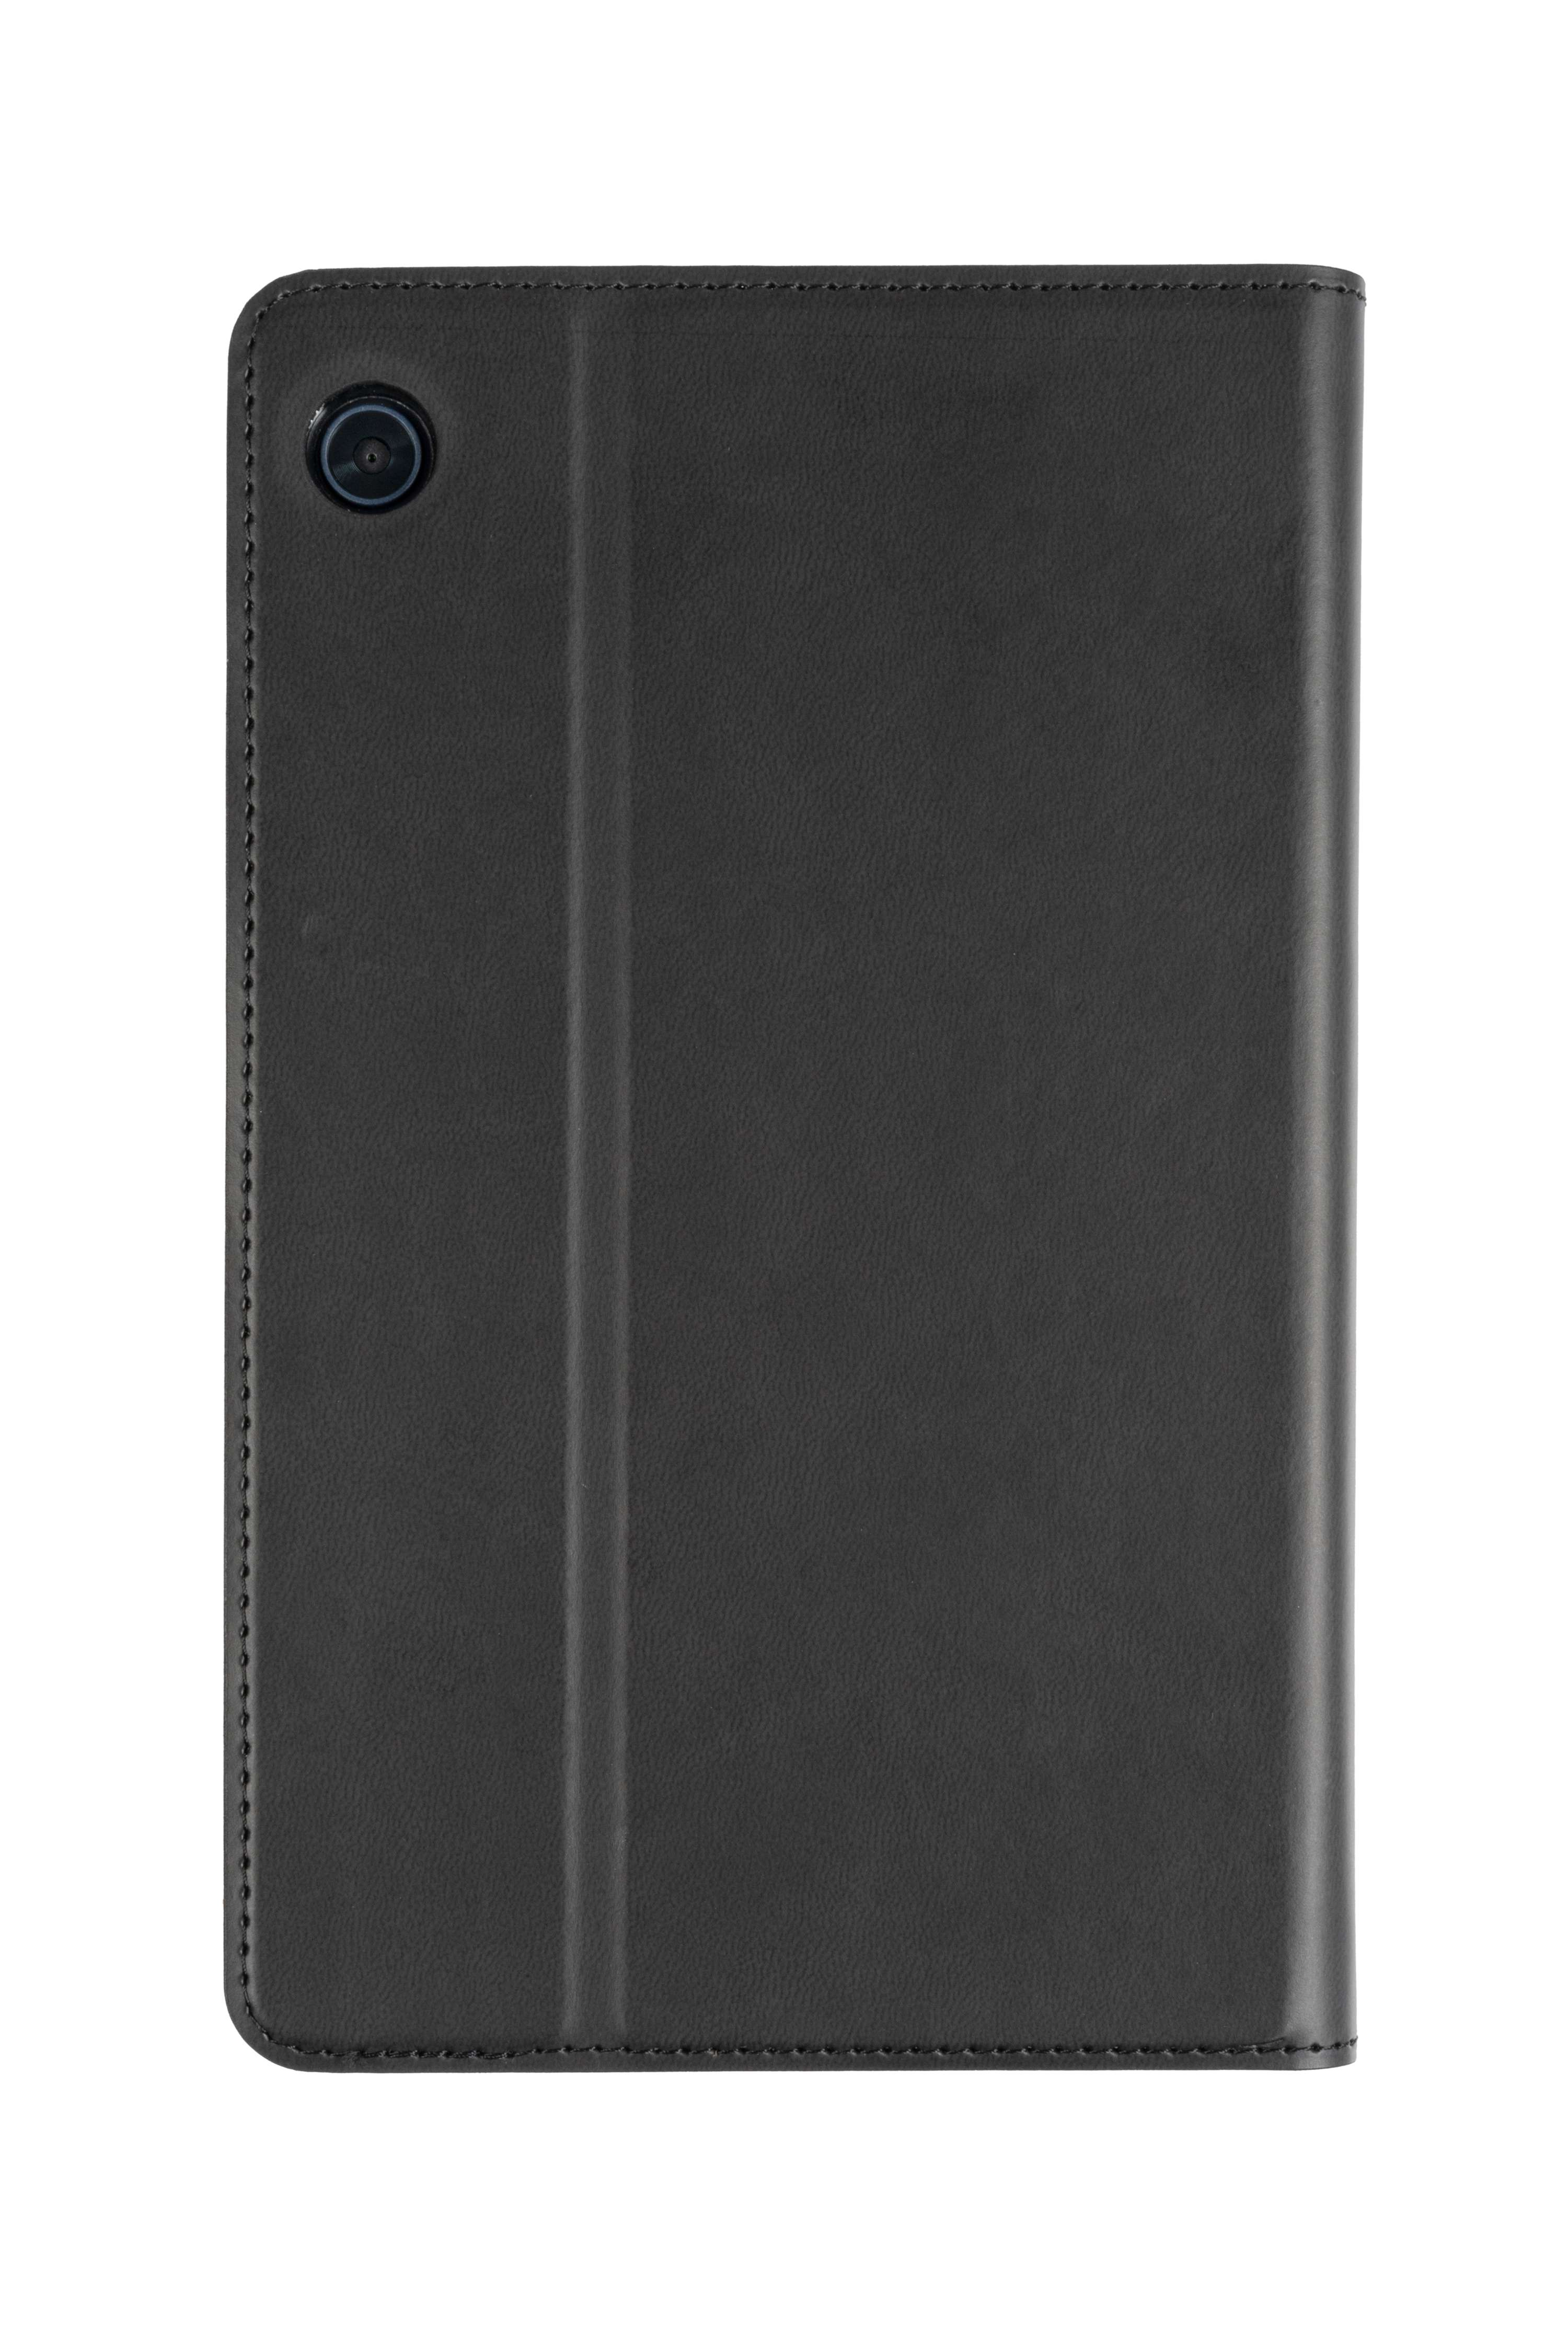 GECKO COVERS Easy-Click für PU 2.0 Schwarz Bookcover Huawei Tablet Cover Hülle Leather